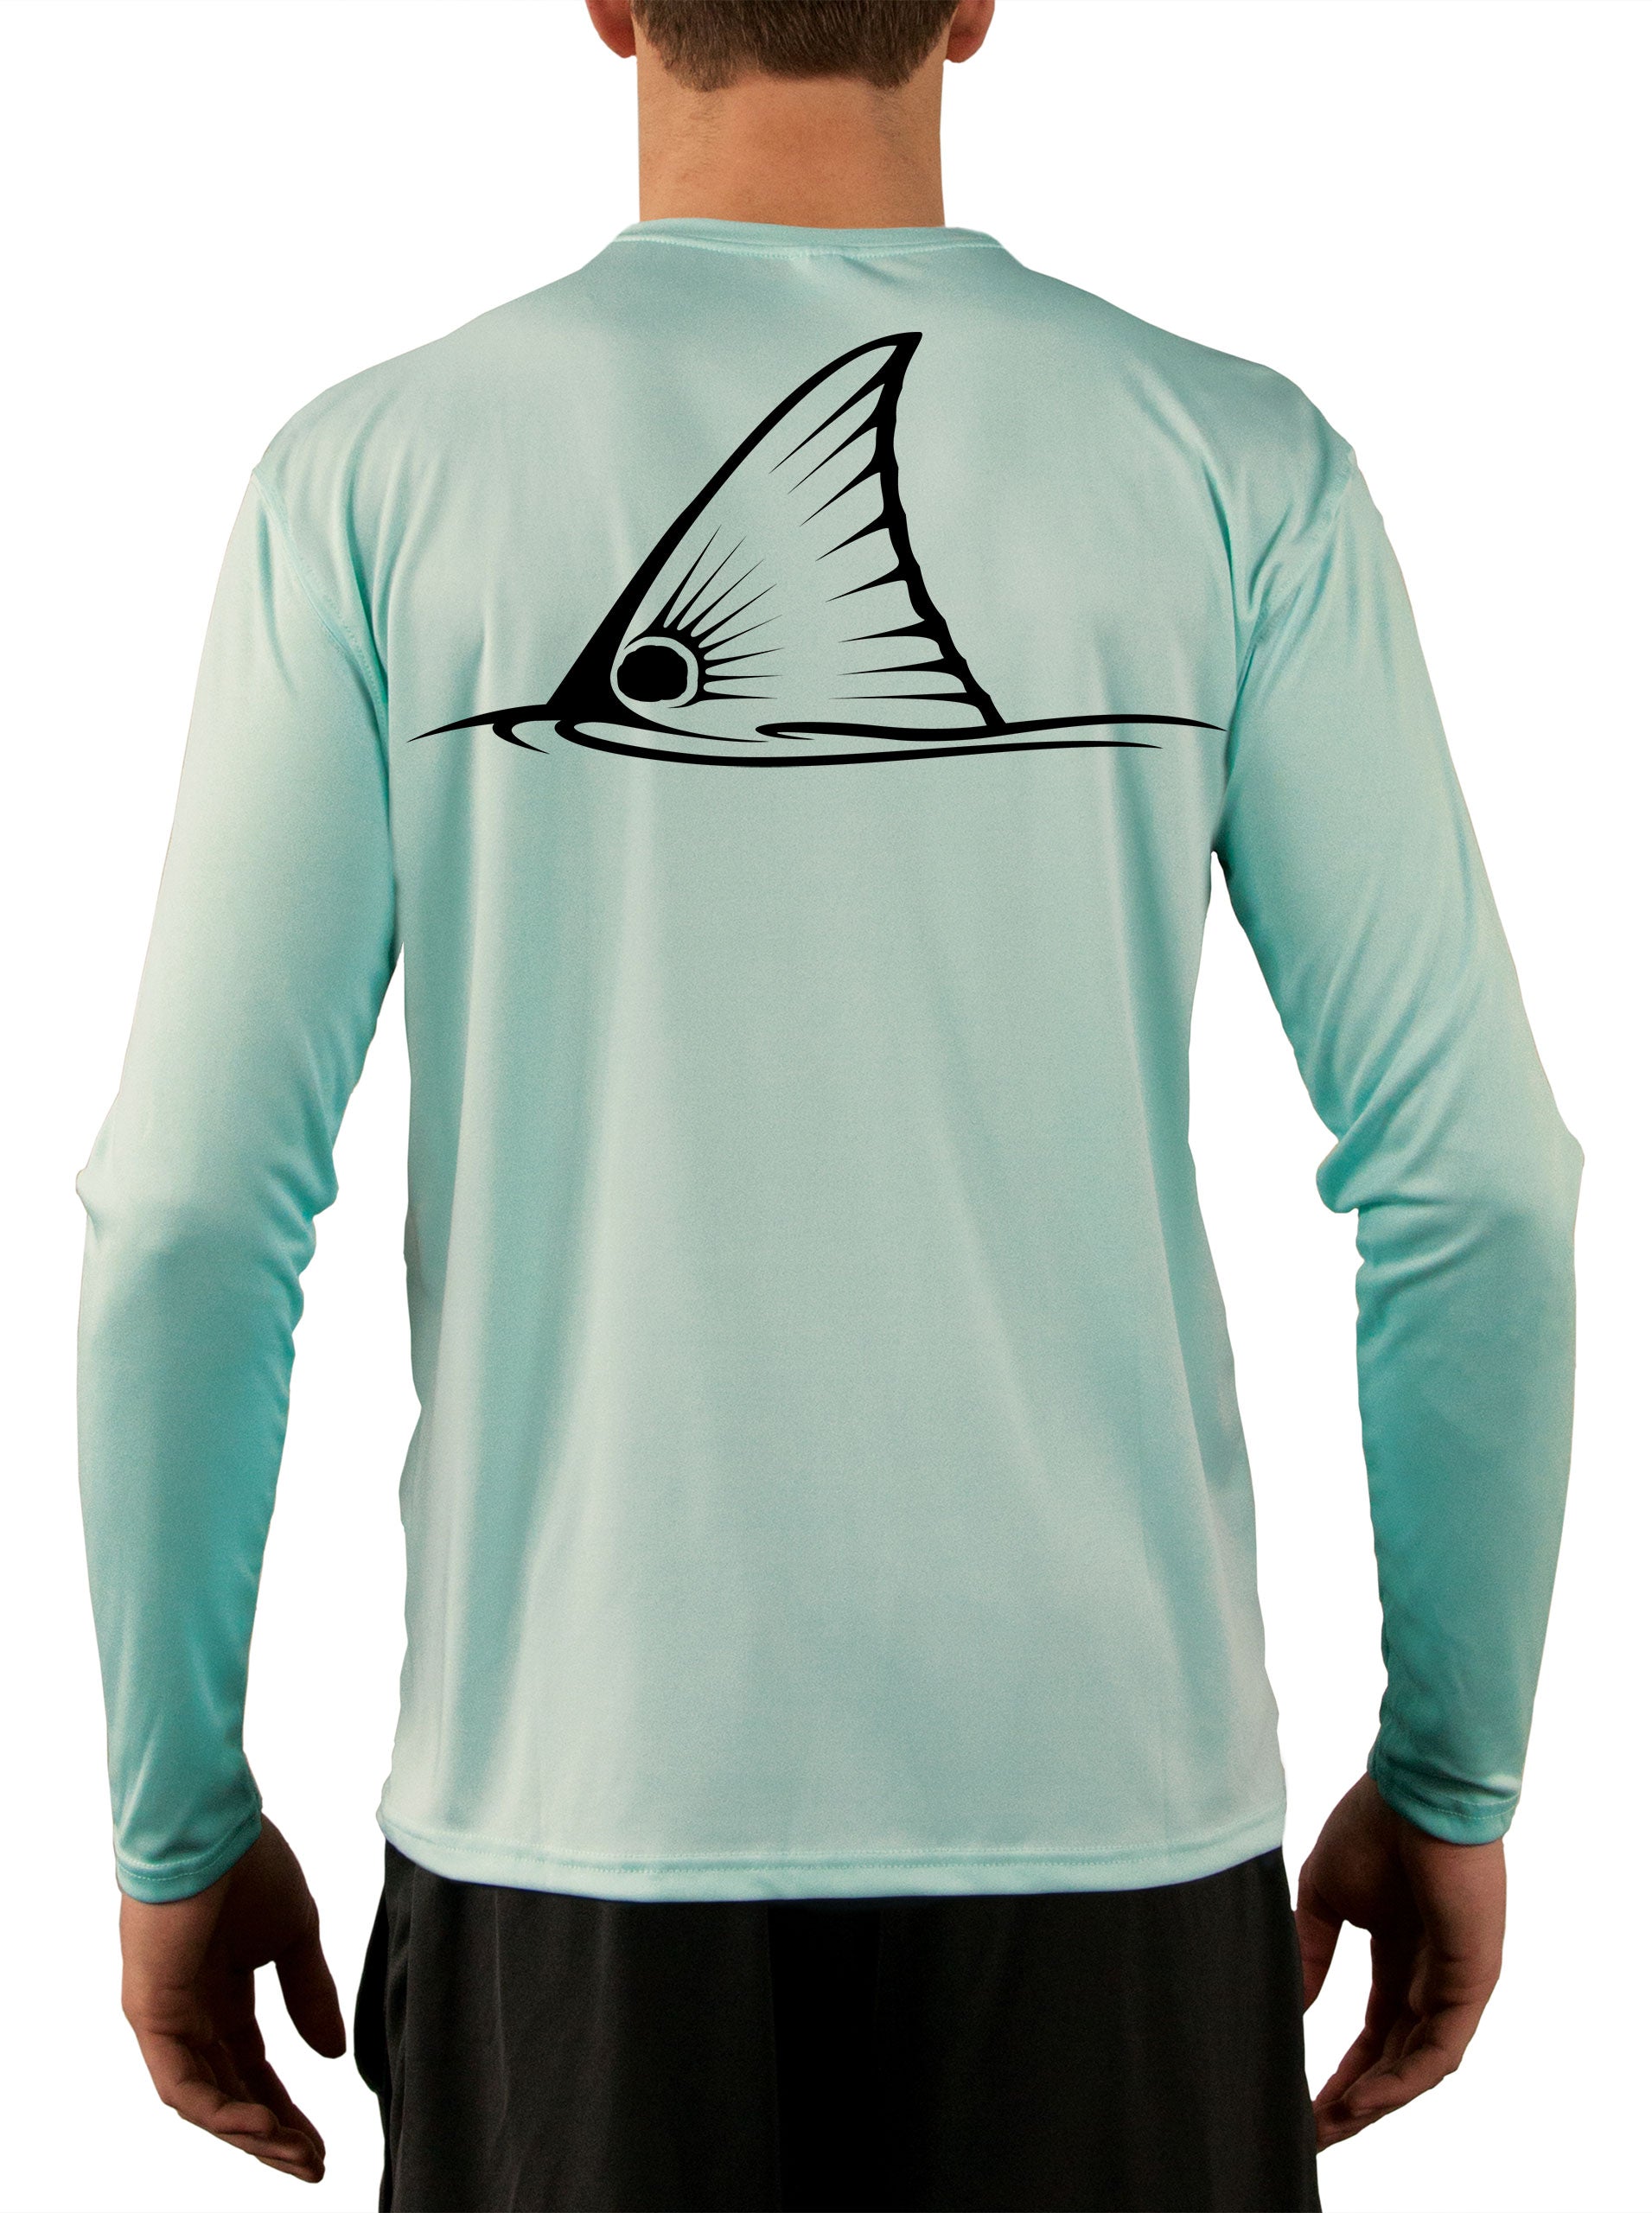 Tailing Redfish Fishing Shirts for Men Red Drum Apparel 4XL / Seagrass